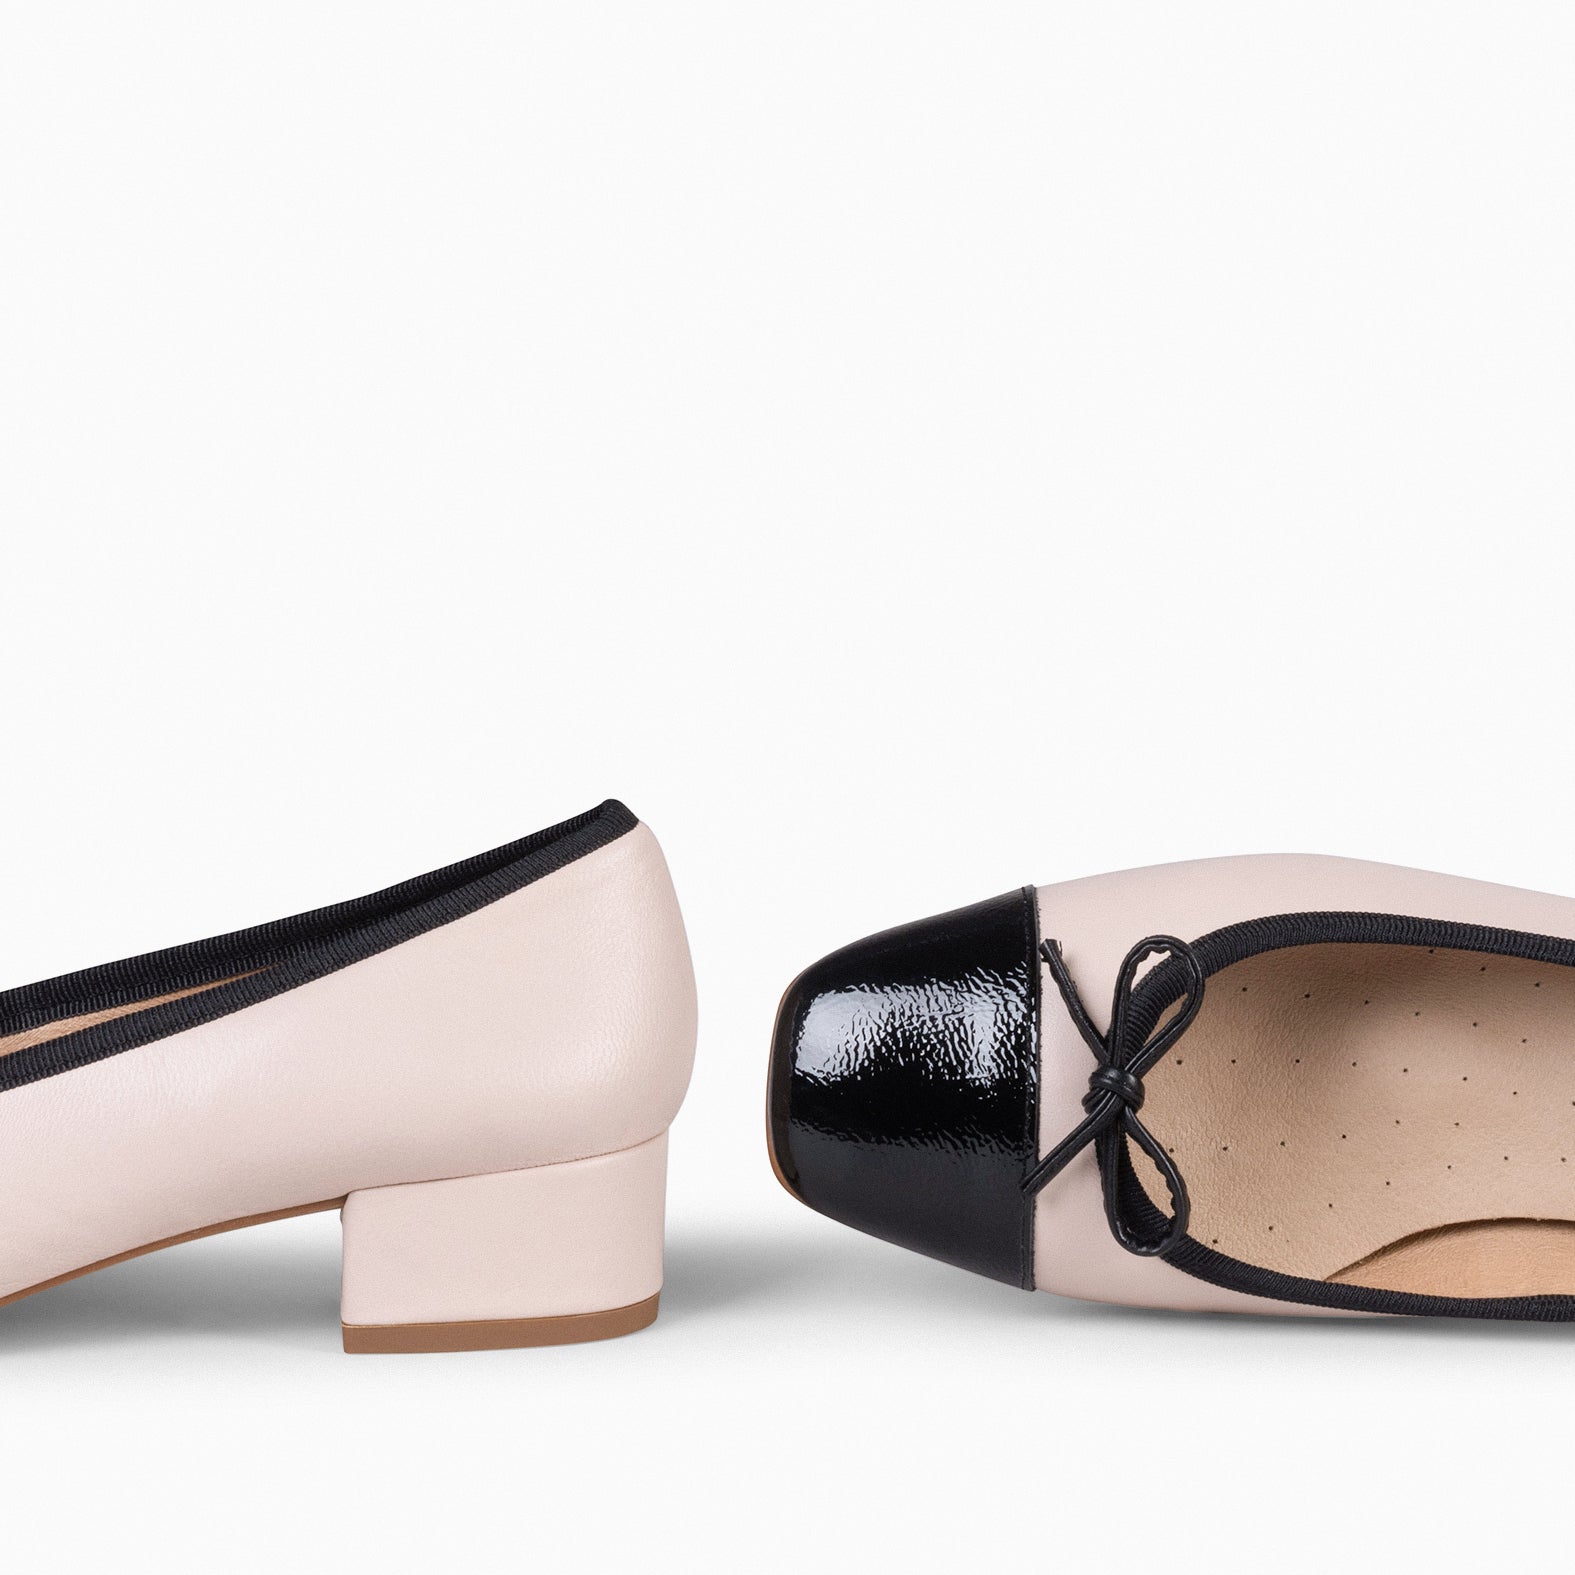 GLAMOUR – NUDE ballerina with heel and patent toe 